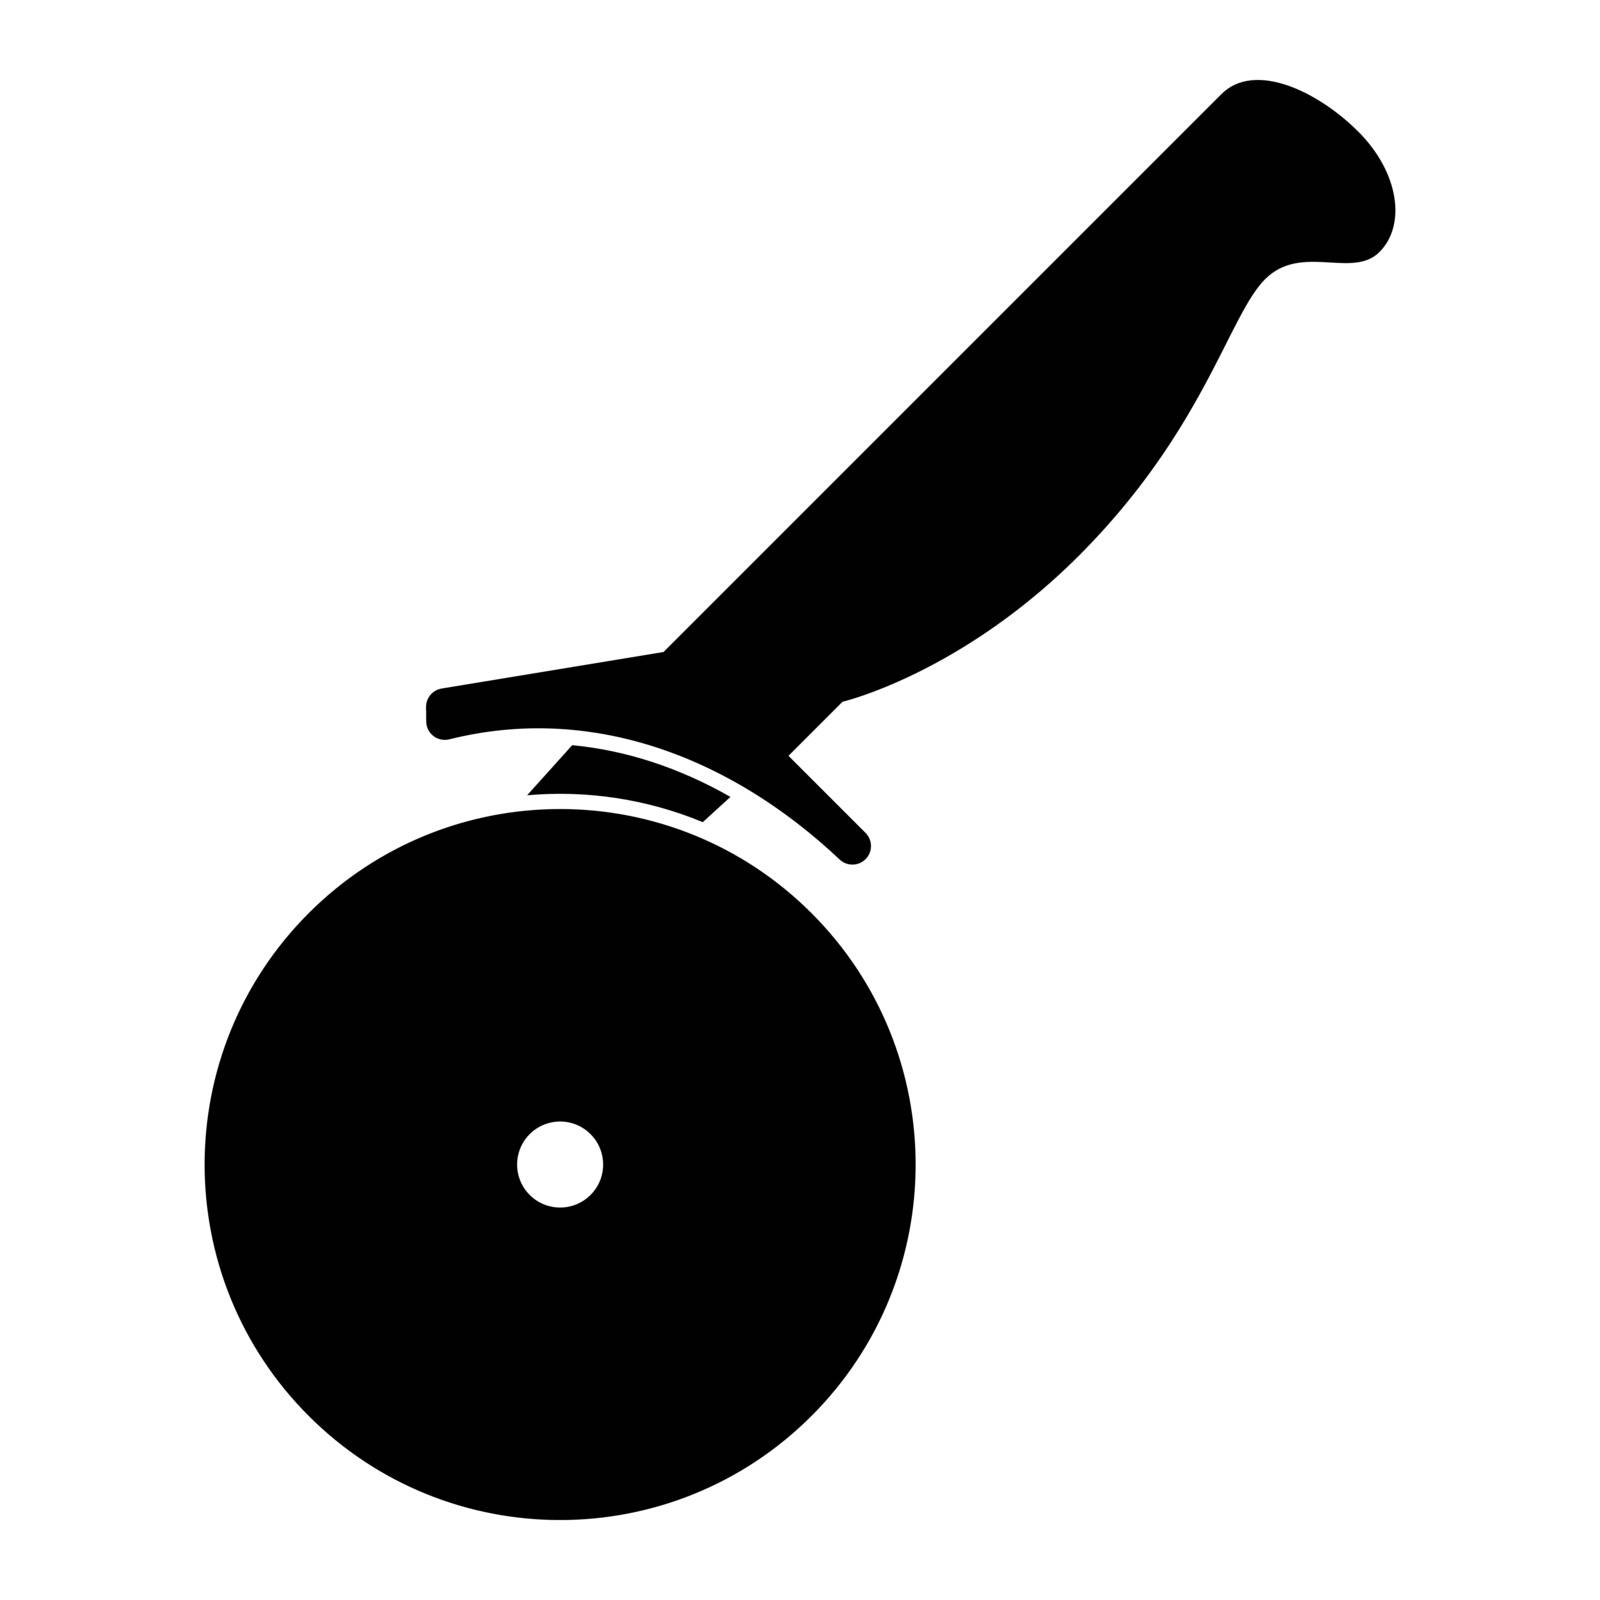 Pizza cutter ot pizza knife icon black color illustration flat style simple image by serhii435